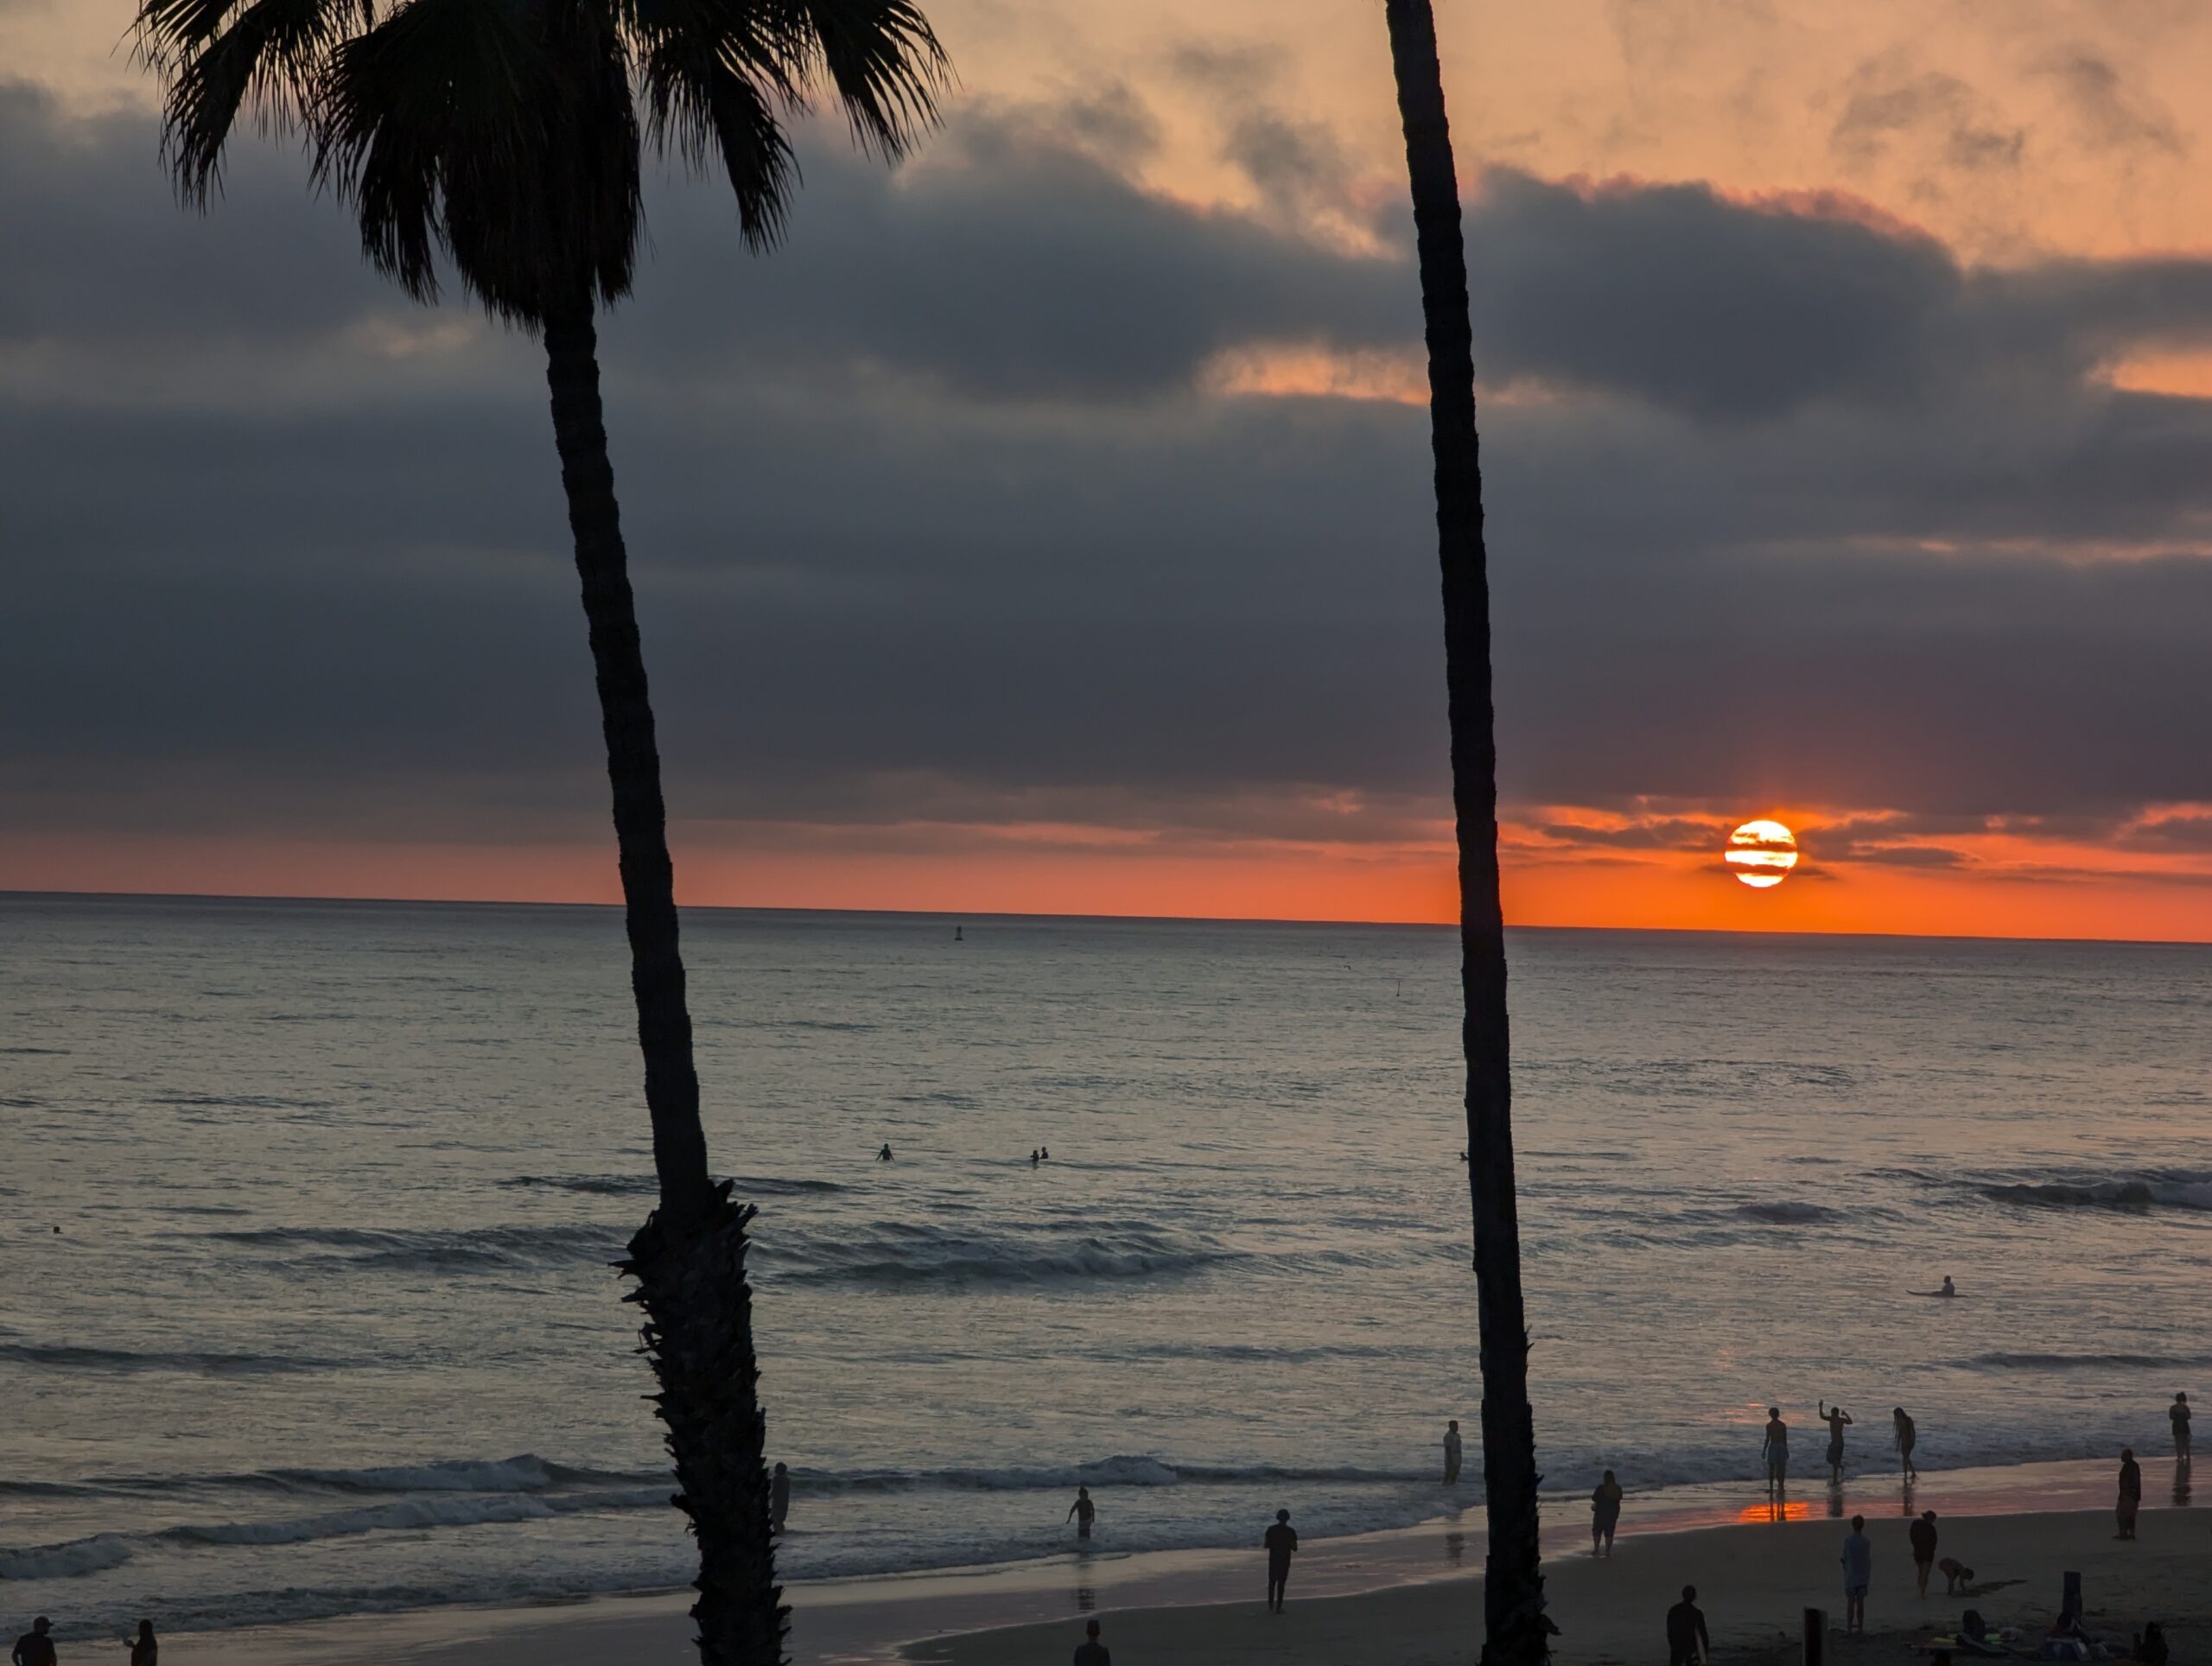 A photo of a red sun setting below the clouds but just above the ocean from the Oceanside pier. Palm trees are silhouetted in the foreground.